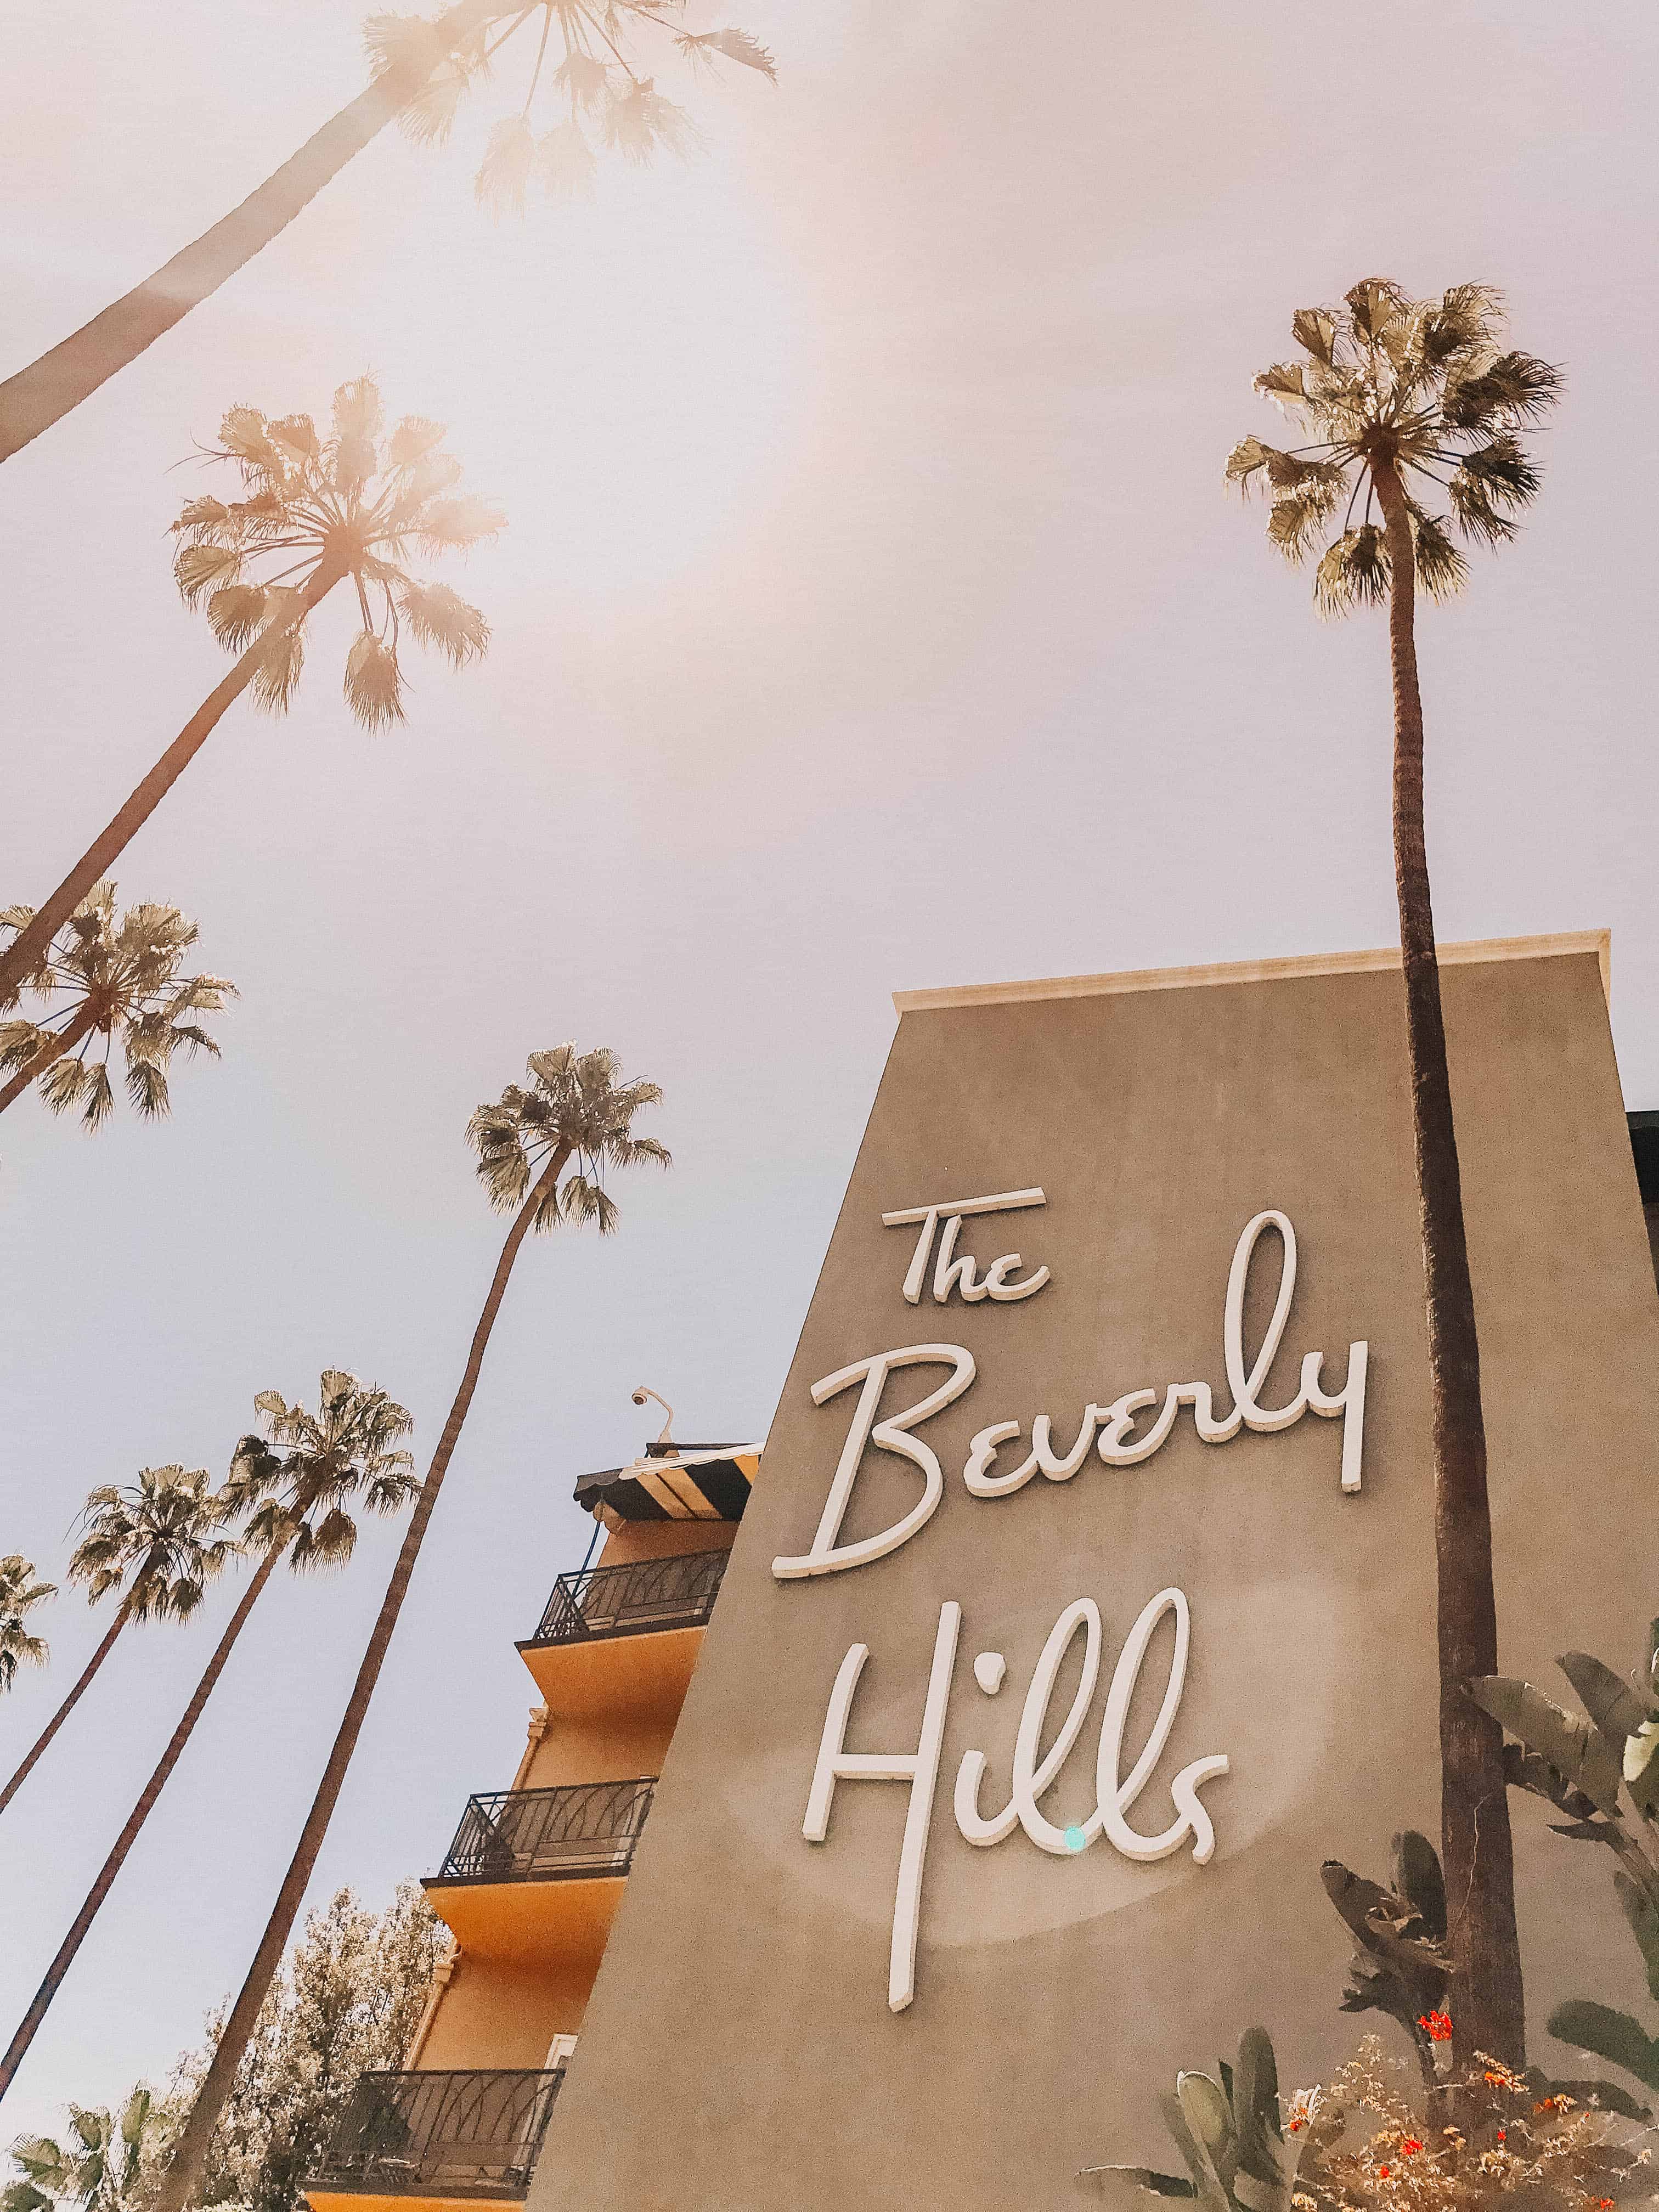 Visiting Rodeo Drive in Beverly Hills: Here's What to Expect – Blog